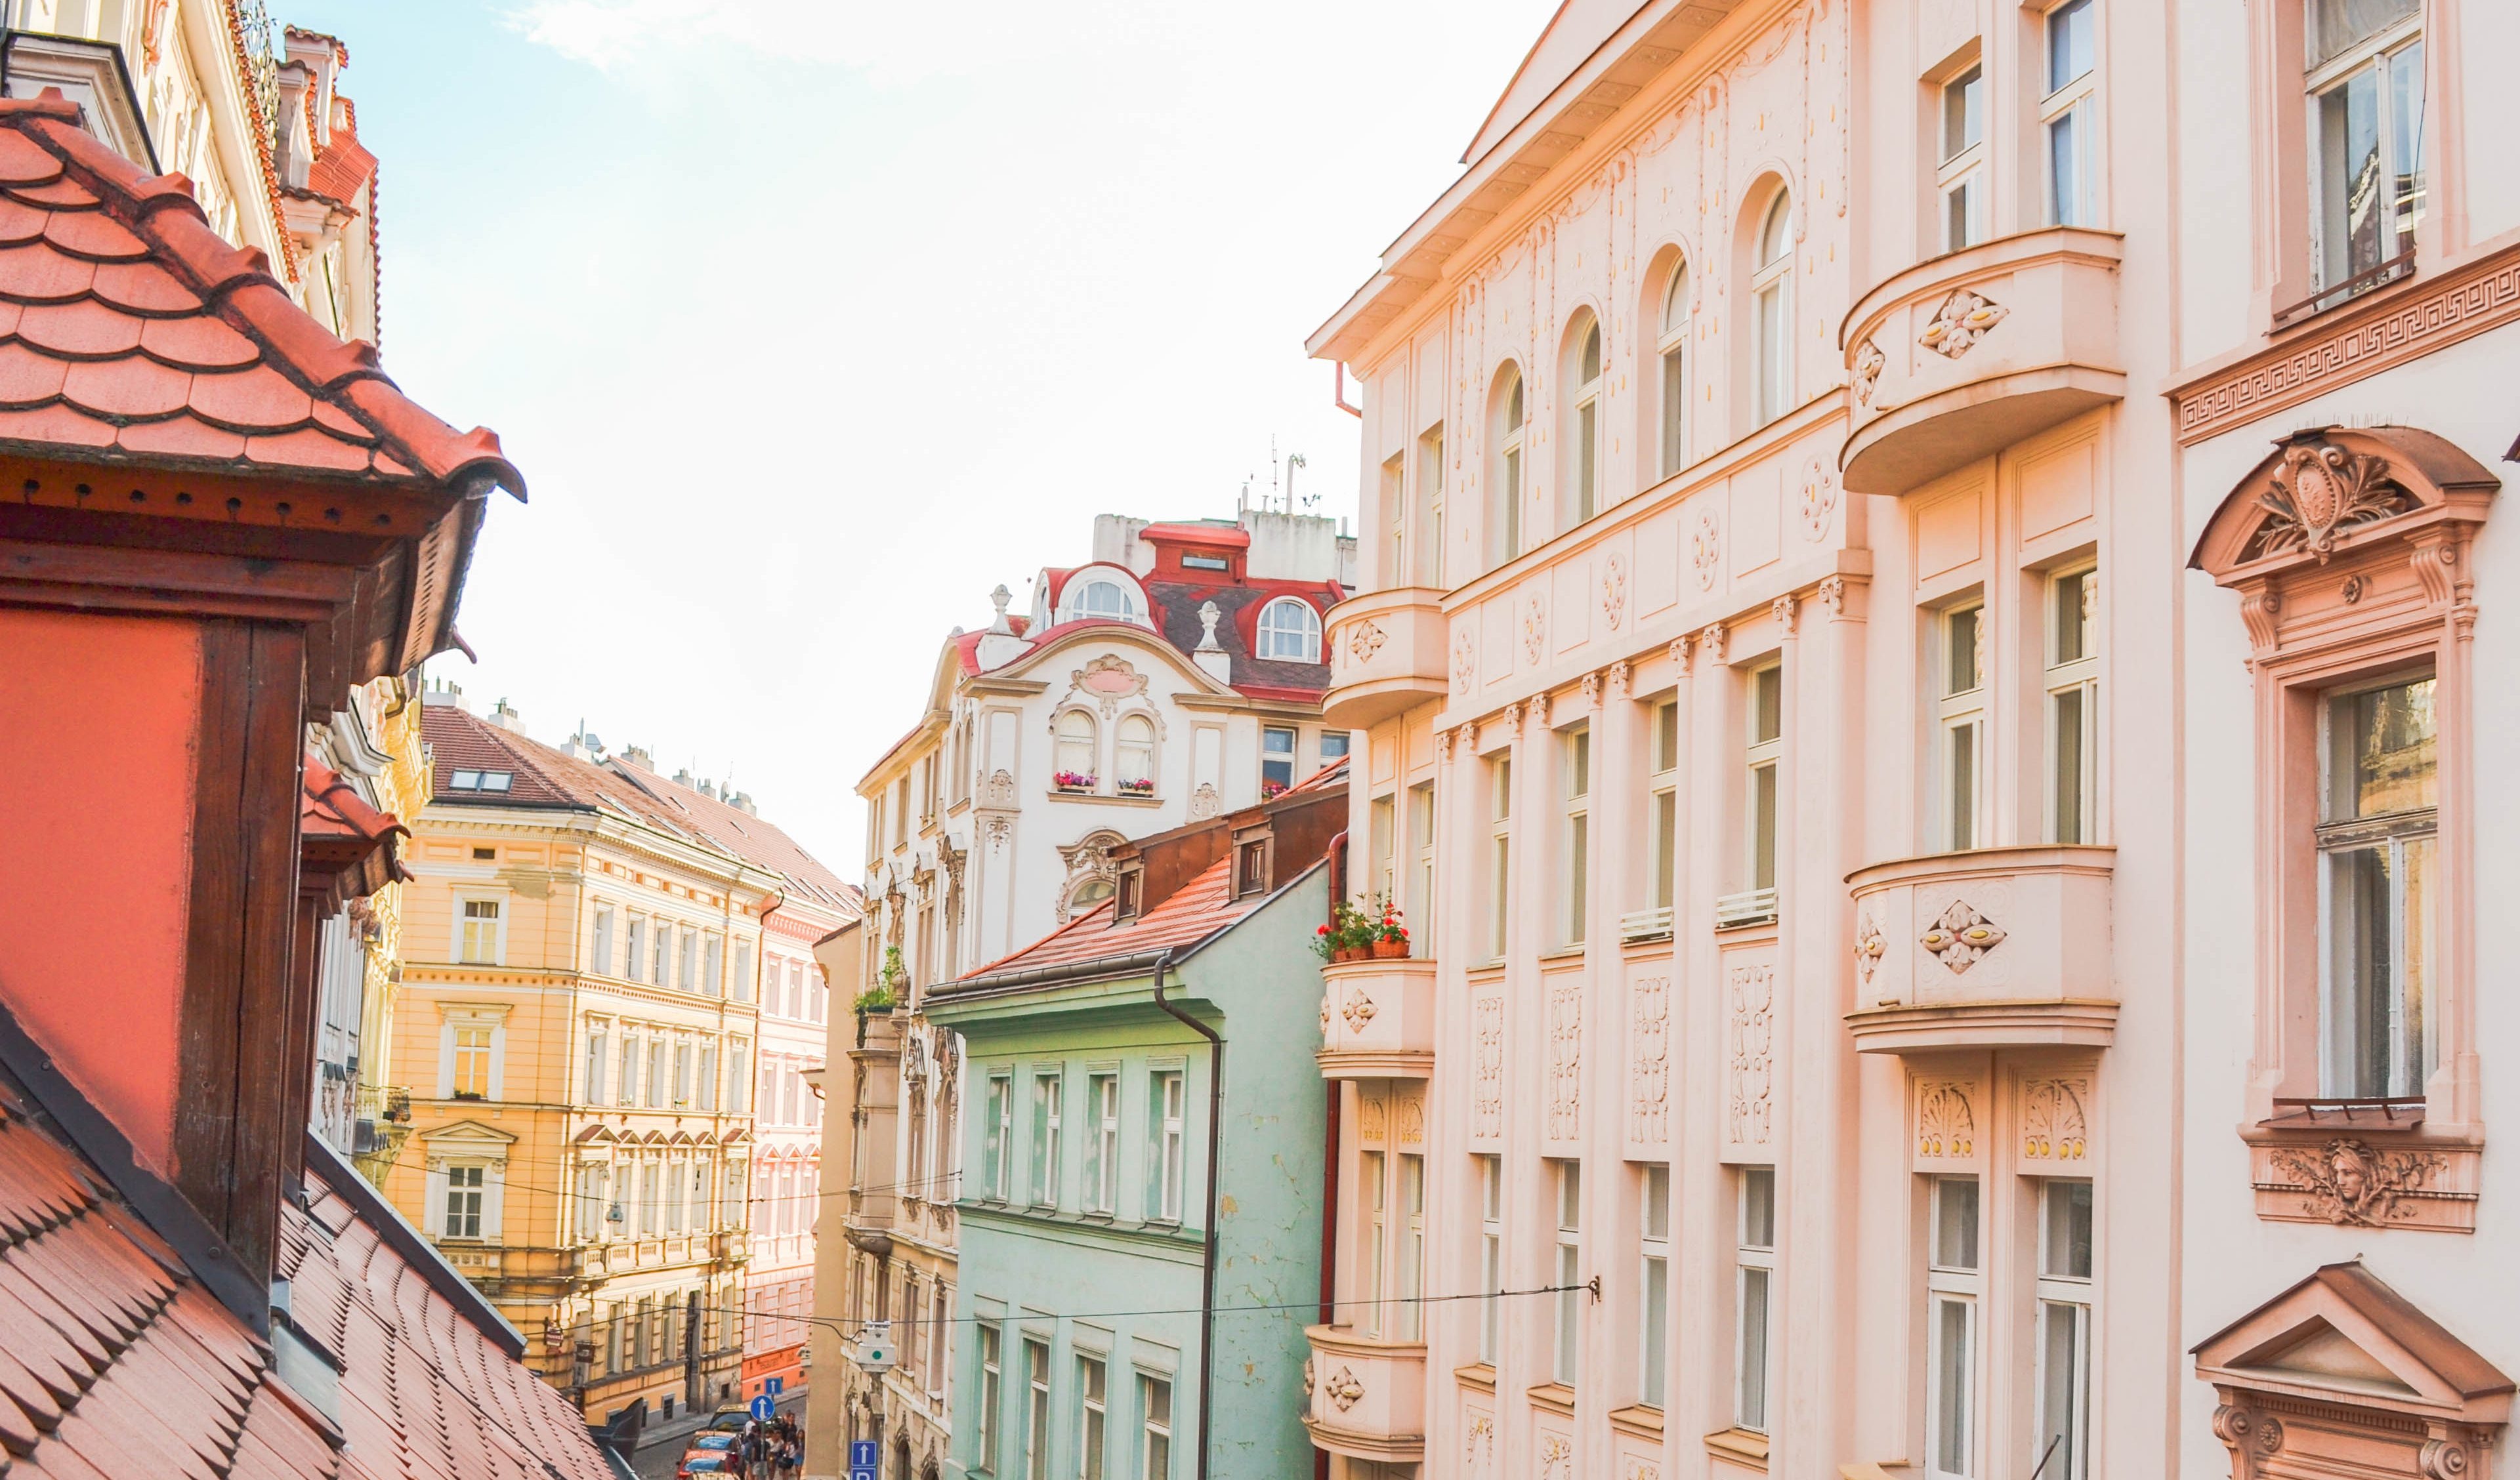 Deal Alert: Fly To Prague for $444 Round-Trip